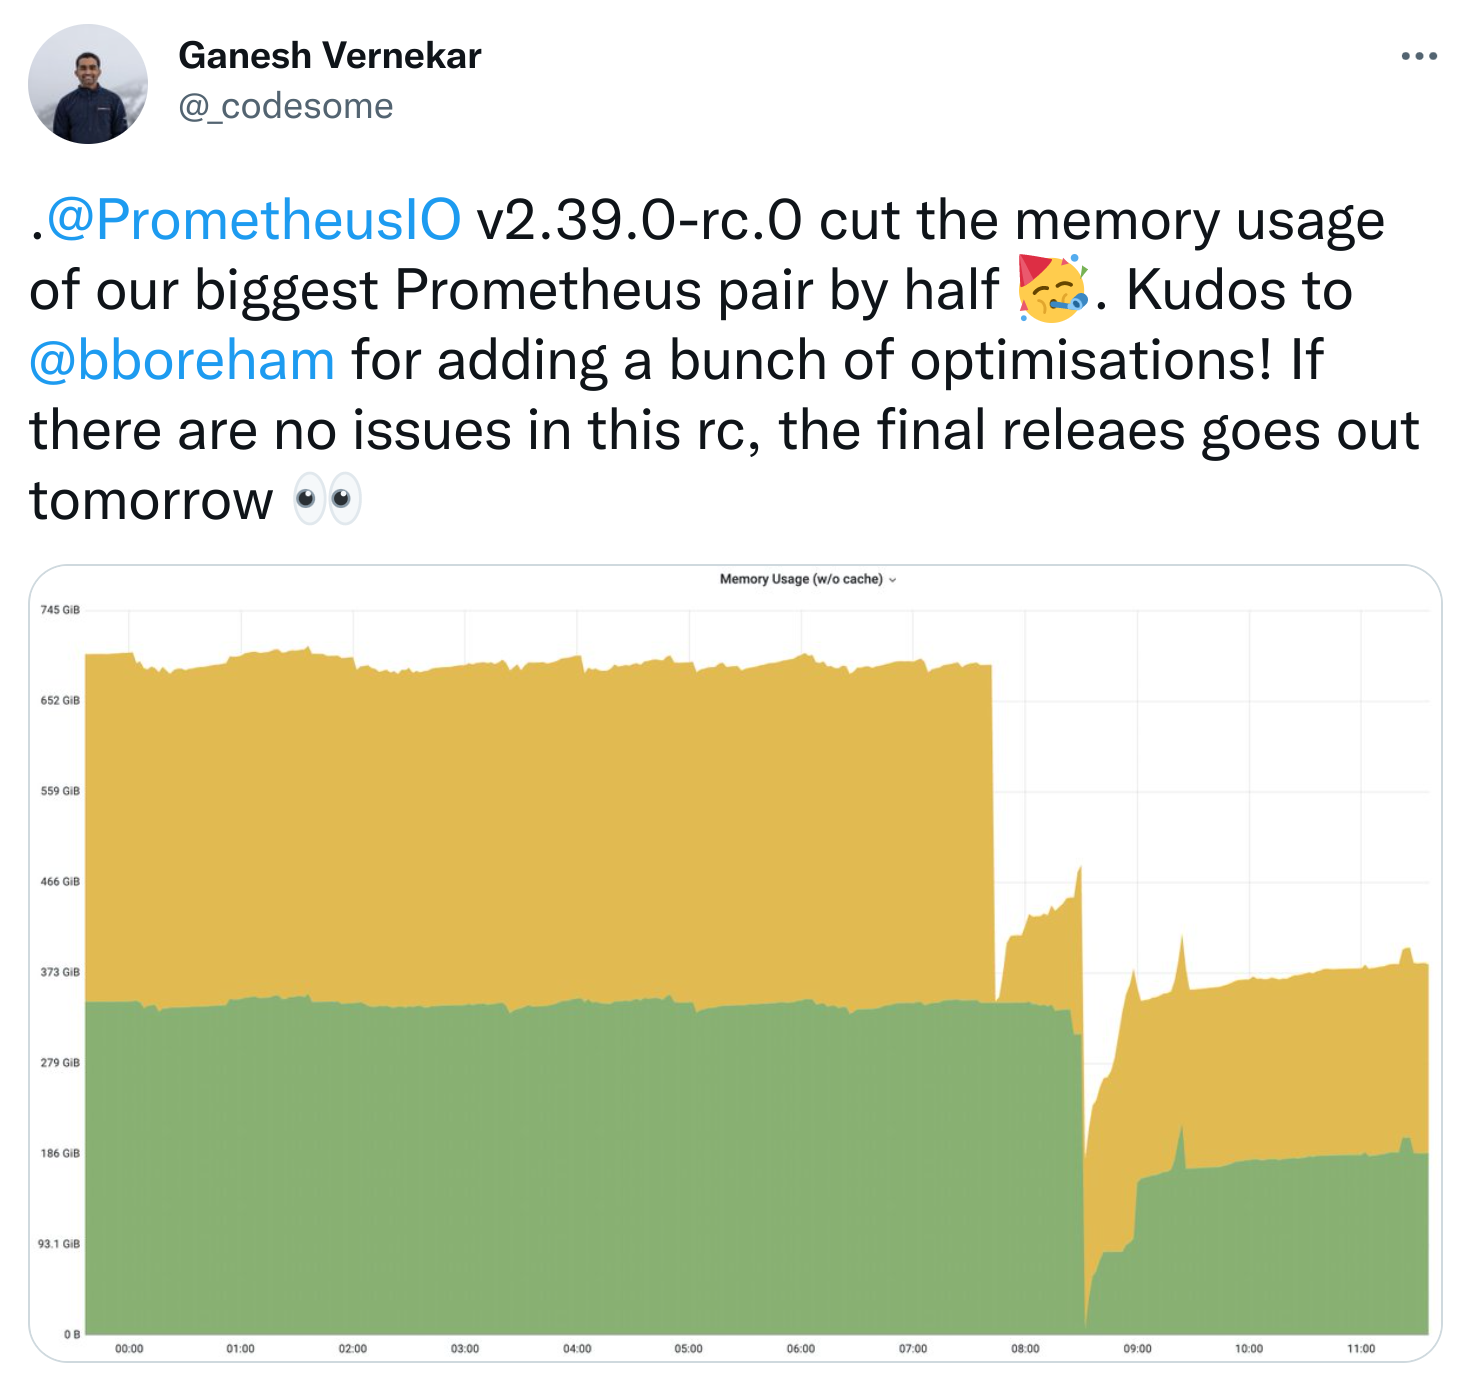 Tweet by Ganesh showing a graph of improved memory usage